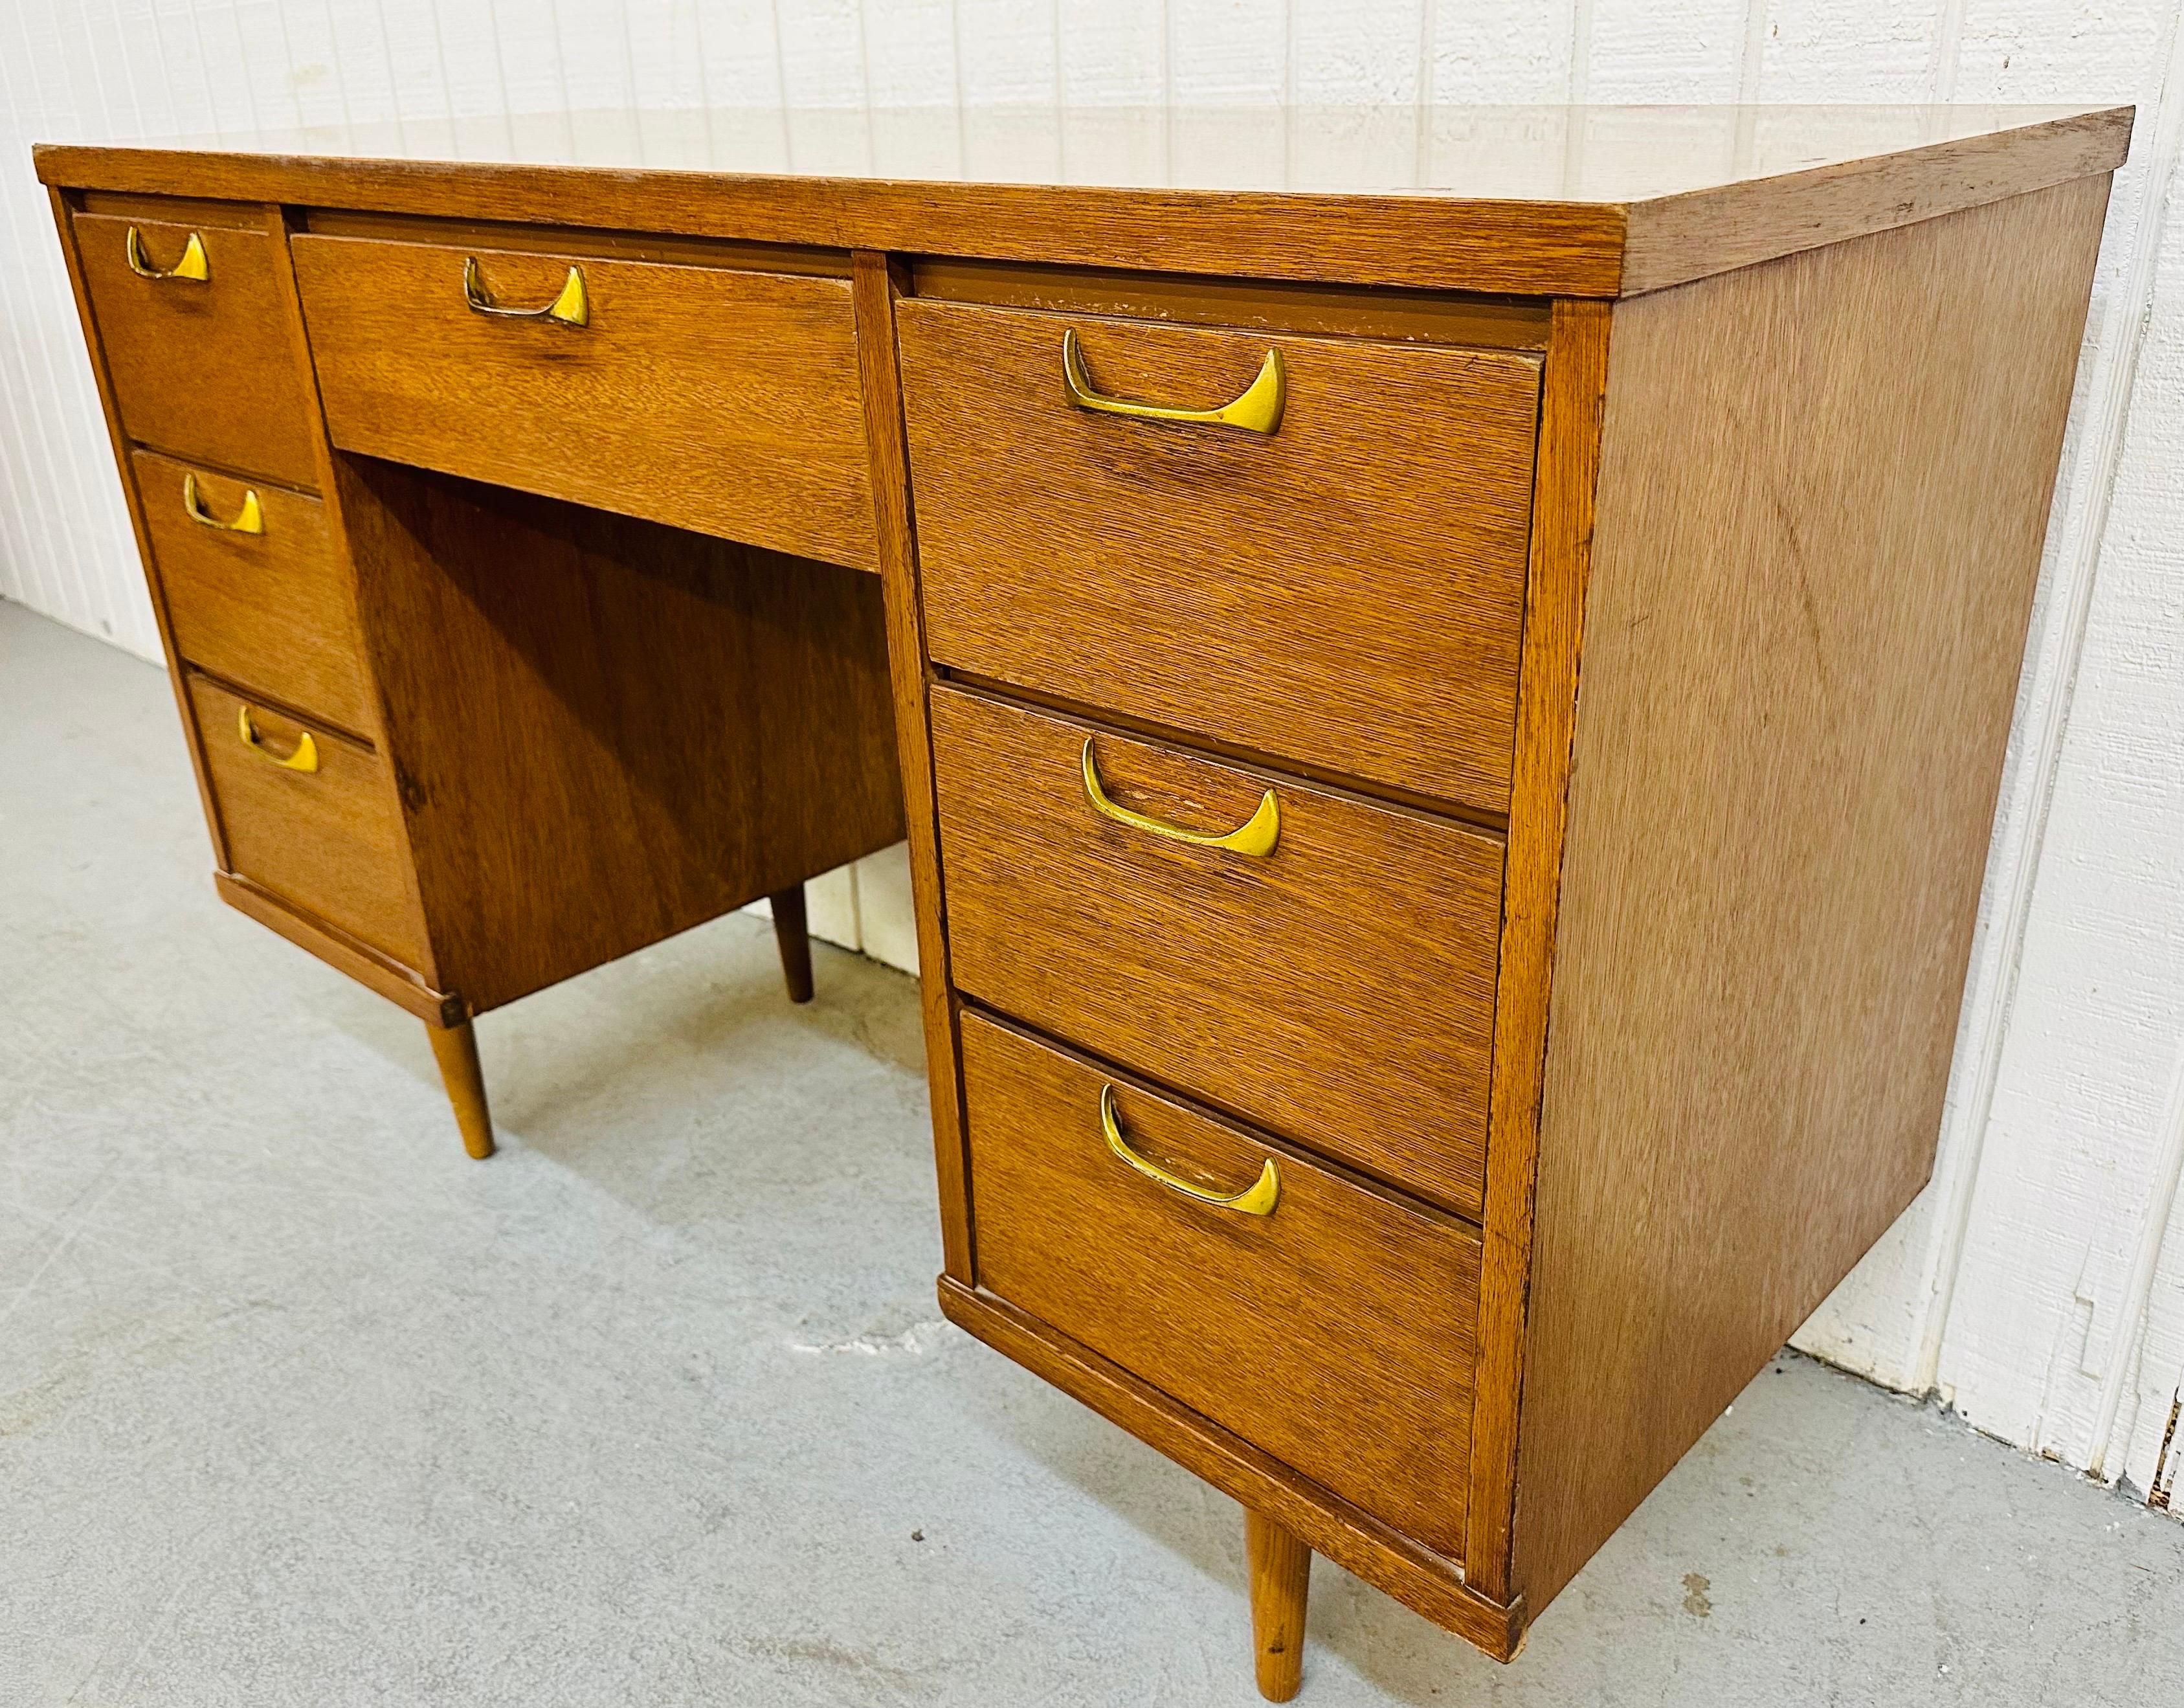 This listing is for a Mid-Century Modern Brasilia Style Walnut Writing Desk. Featuring a straight line design, rectangular protective laminated top, seven drawers for storage, and Brasilia style sculpted brass hardware. This is an exceptional